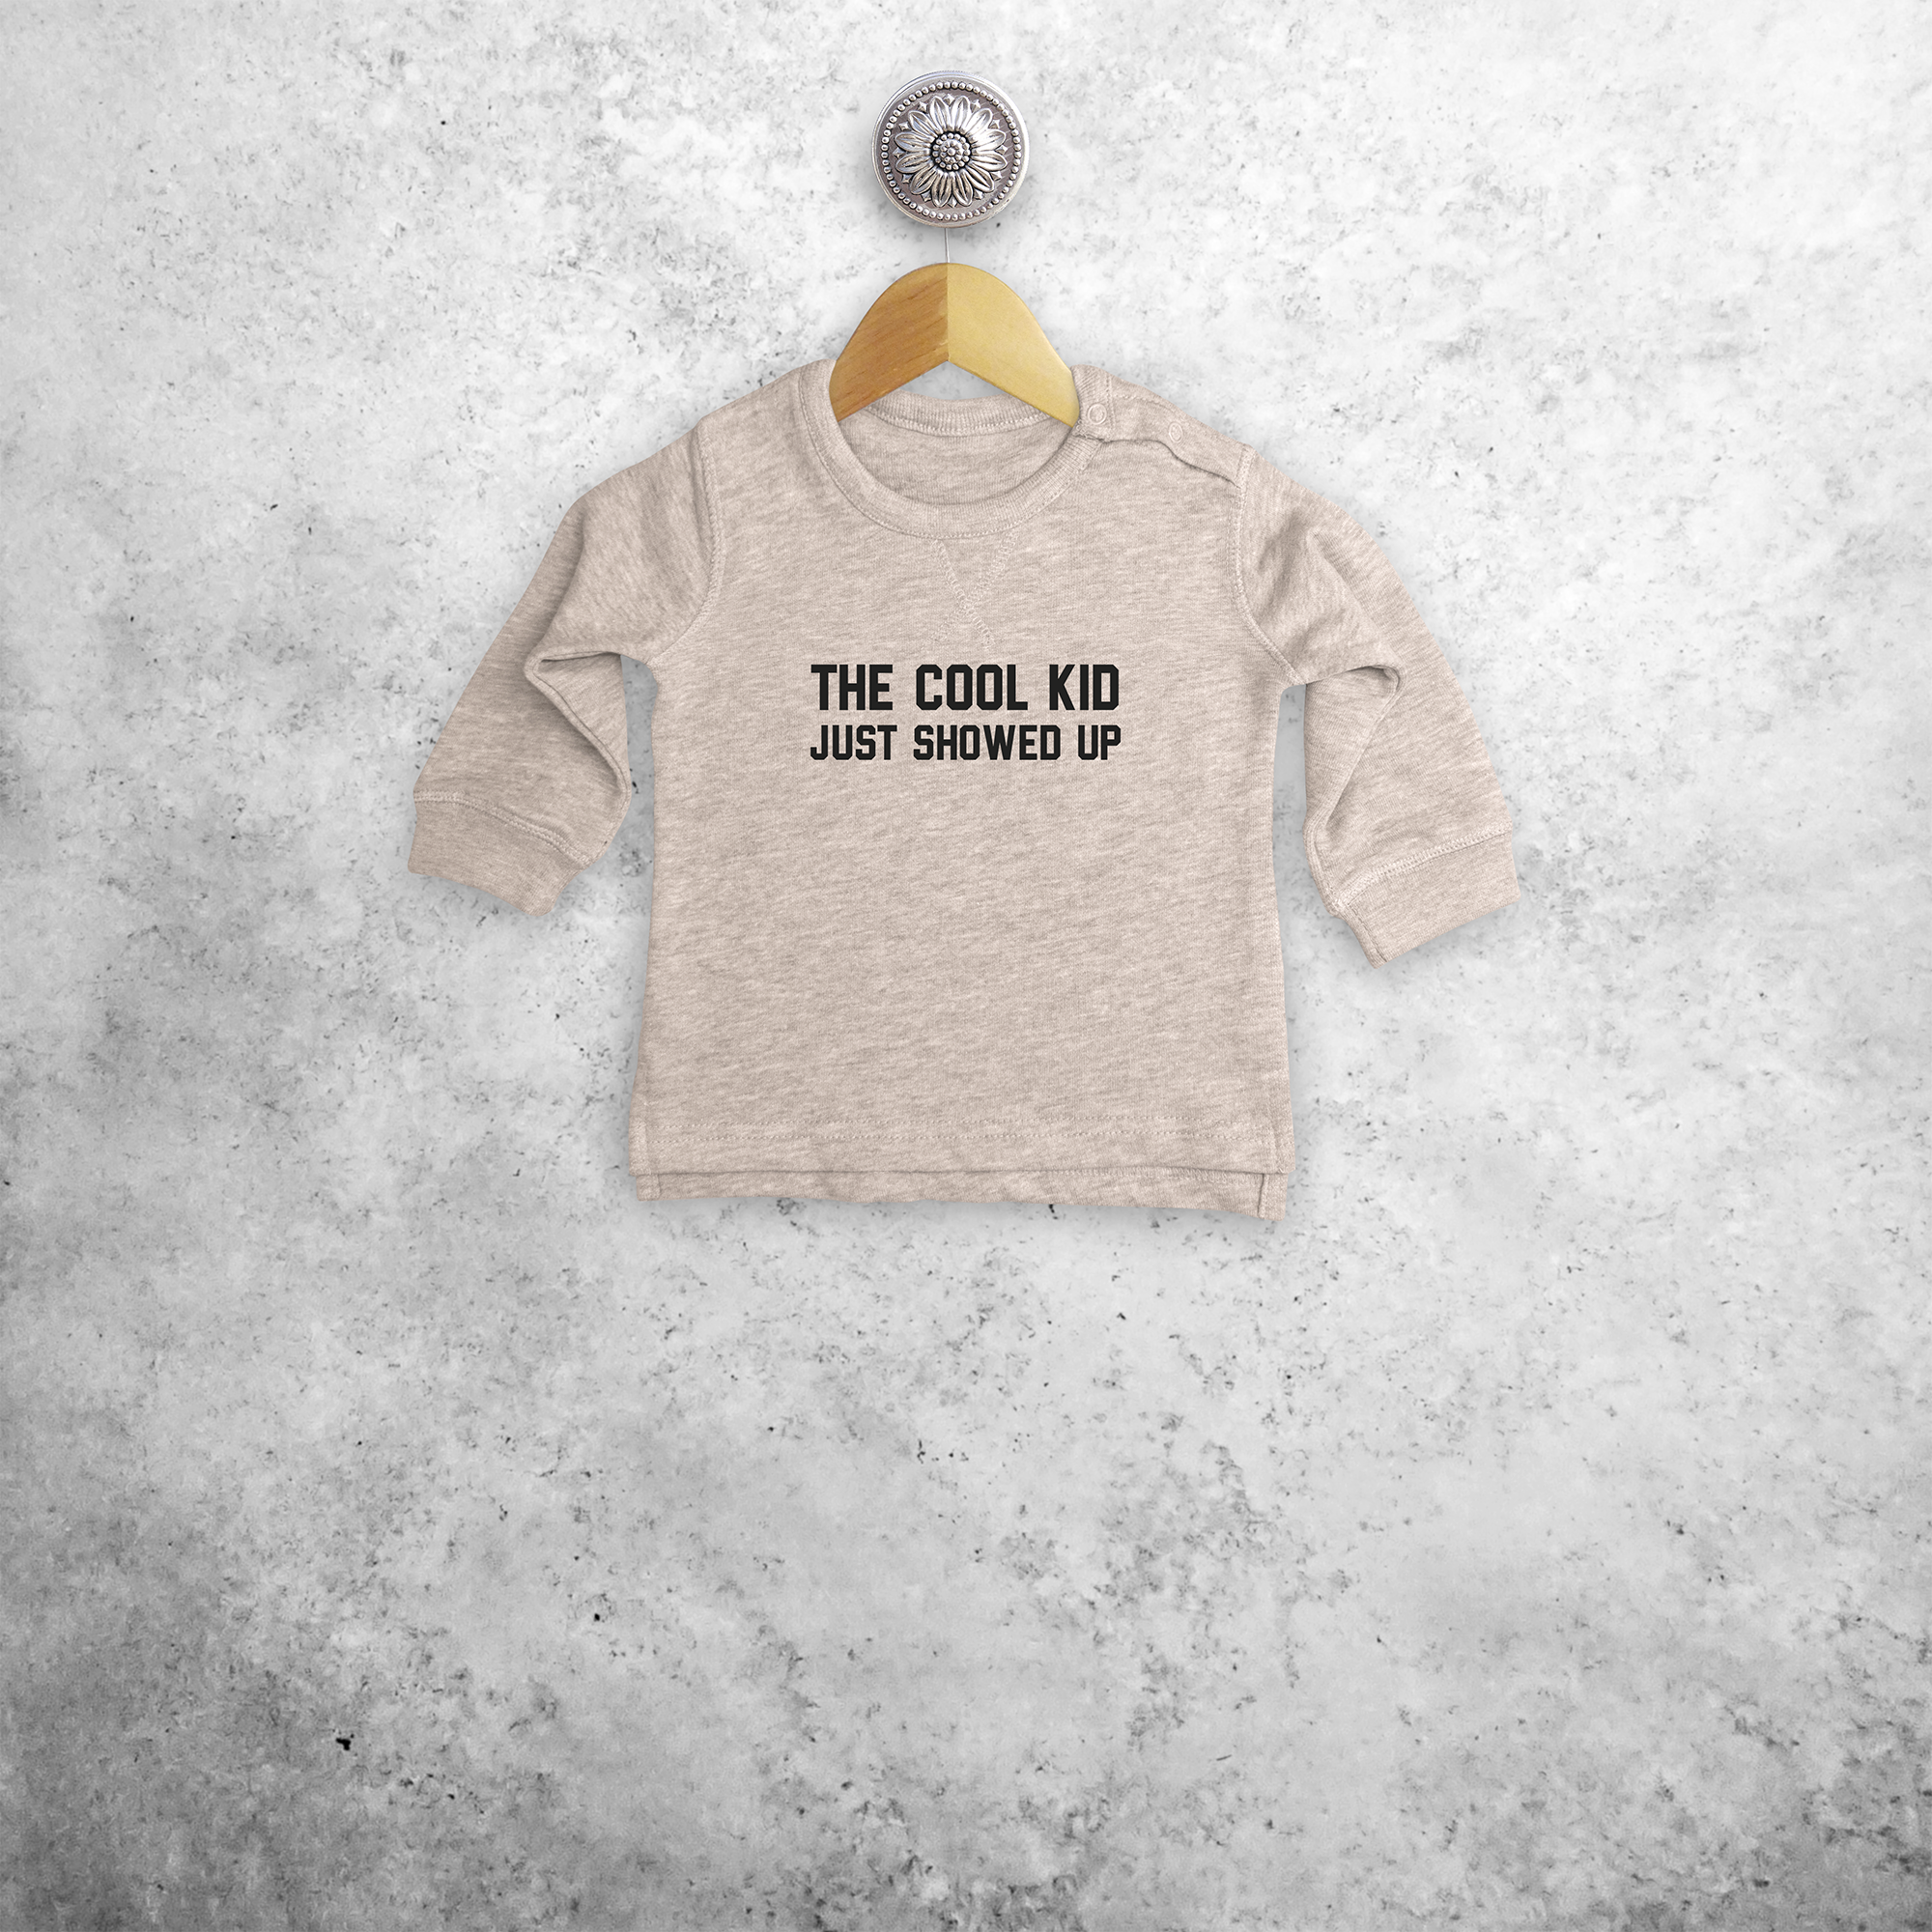 'The cool kid just showed up' baby sweater